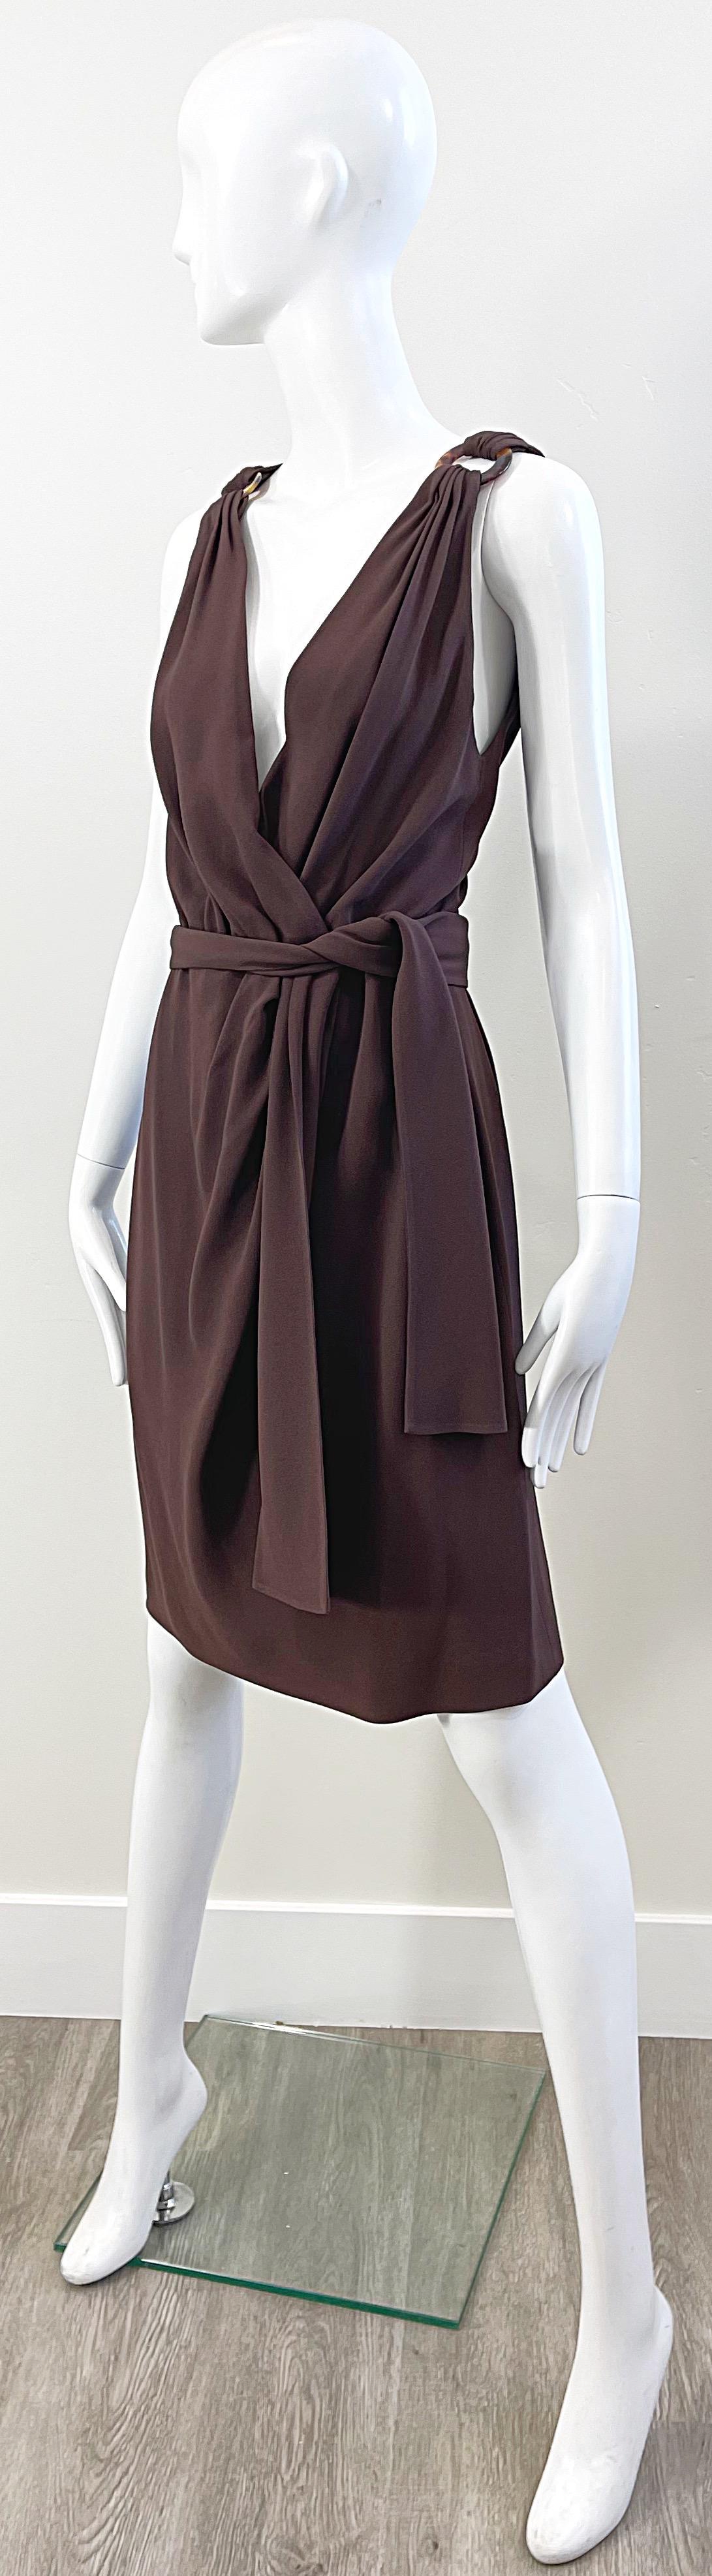 1990s Yves Saint Laurent Size 40 6 / 8 Brown Plunging Vintage 90s YSL Dress In Excellent Condition For Sale In San Diego, CA